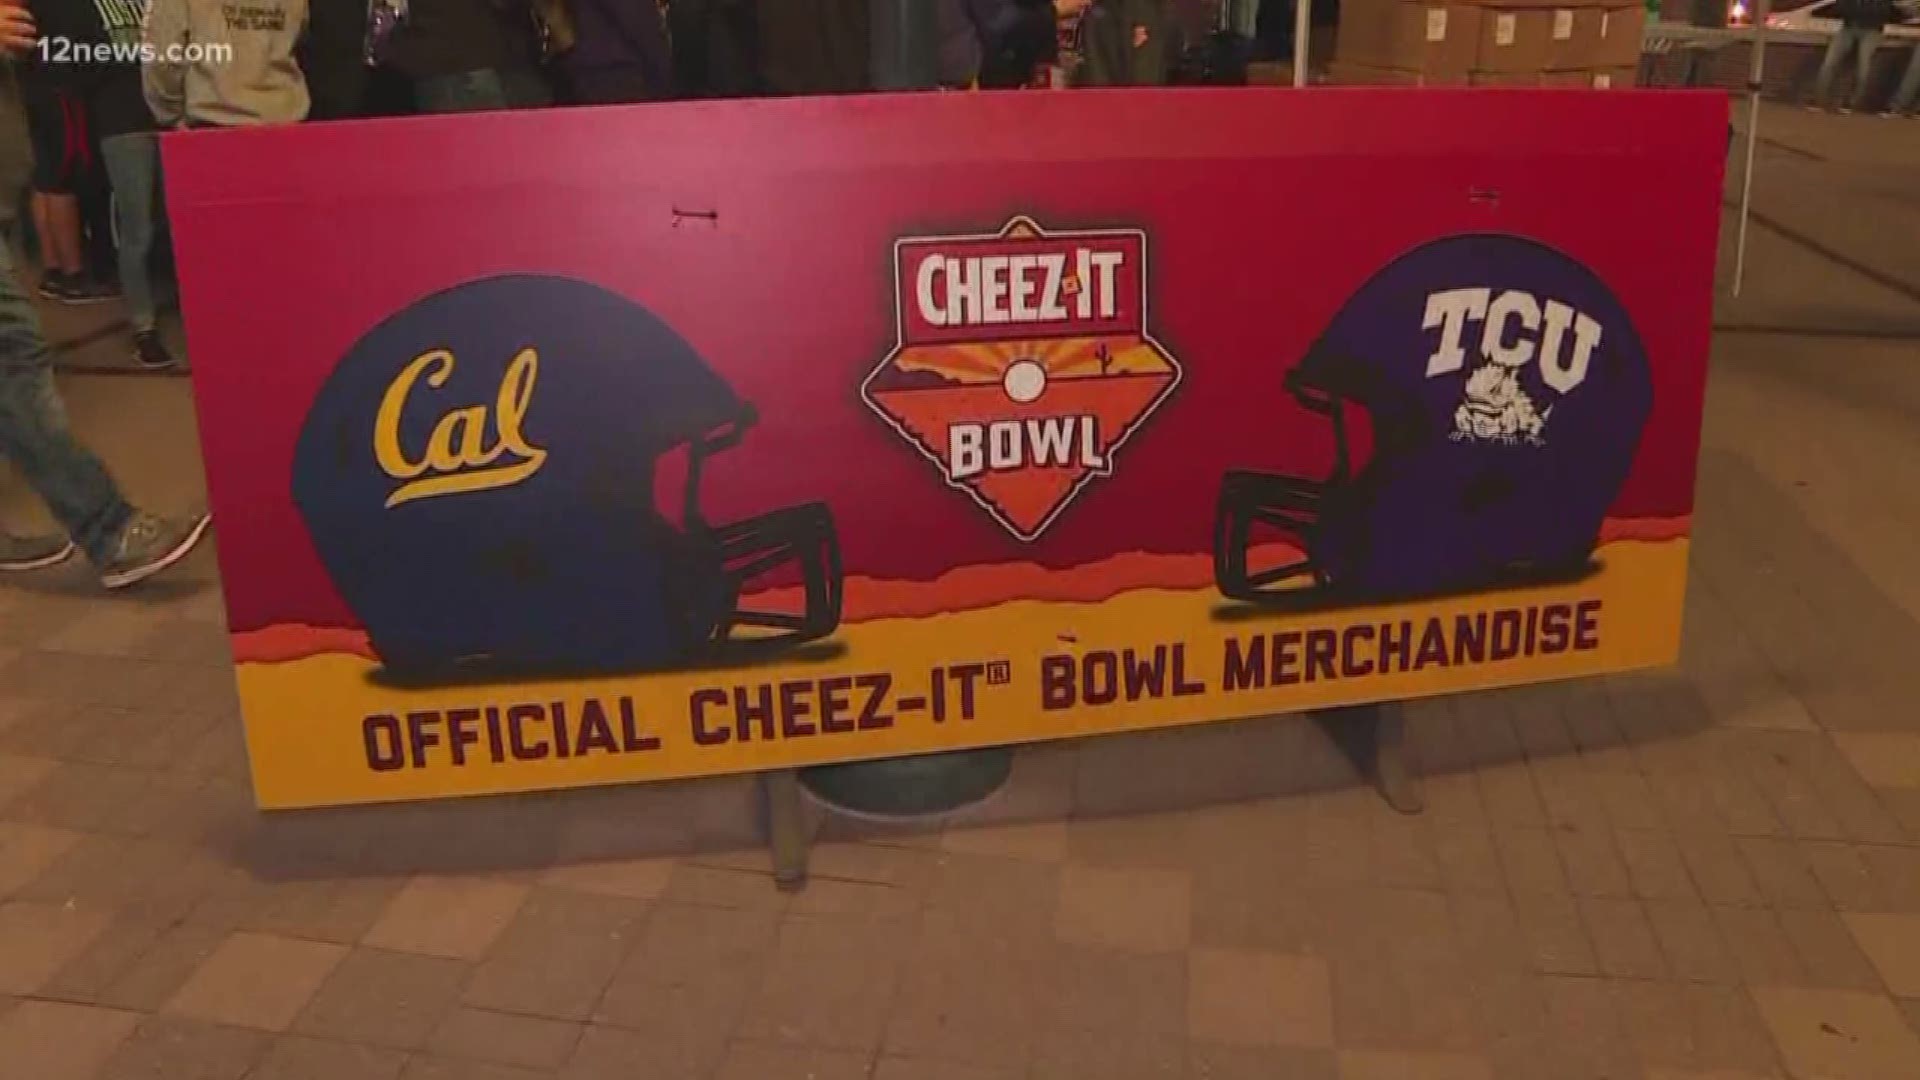 People have been gathering in Downtown Phoenix since this afternoon gearing up for the Cheez-It Bowl. Chase Field has been transformed from a baseball field to a football field to welcome Cal and TCU fans.